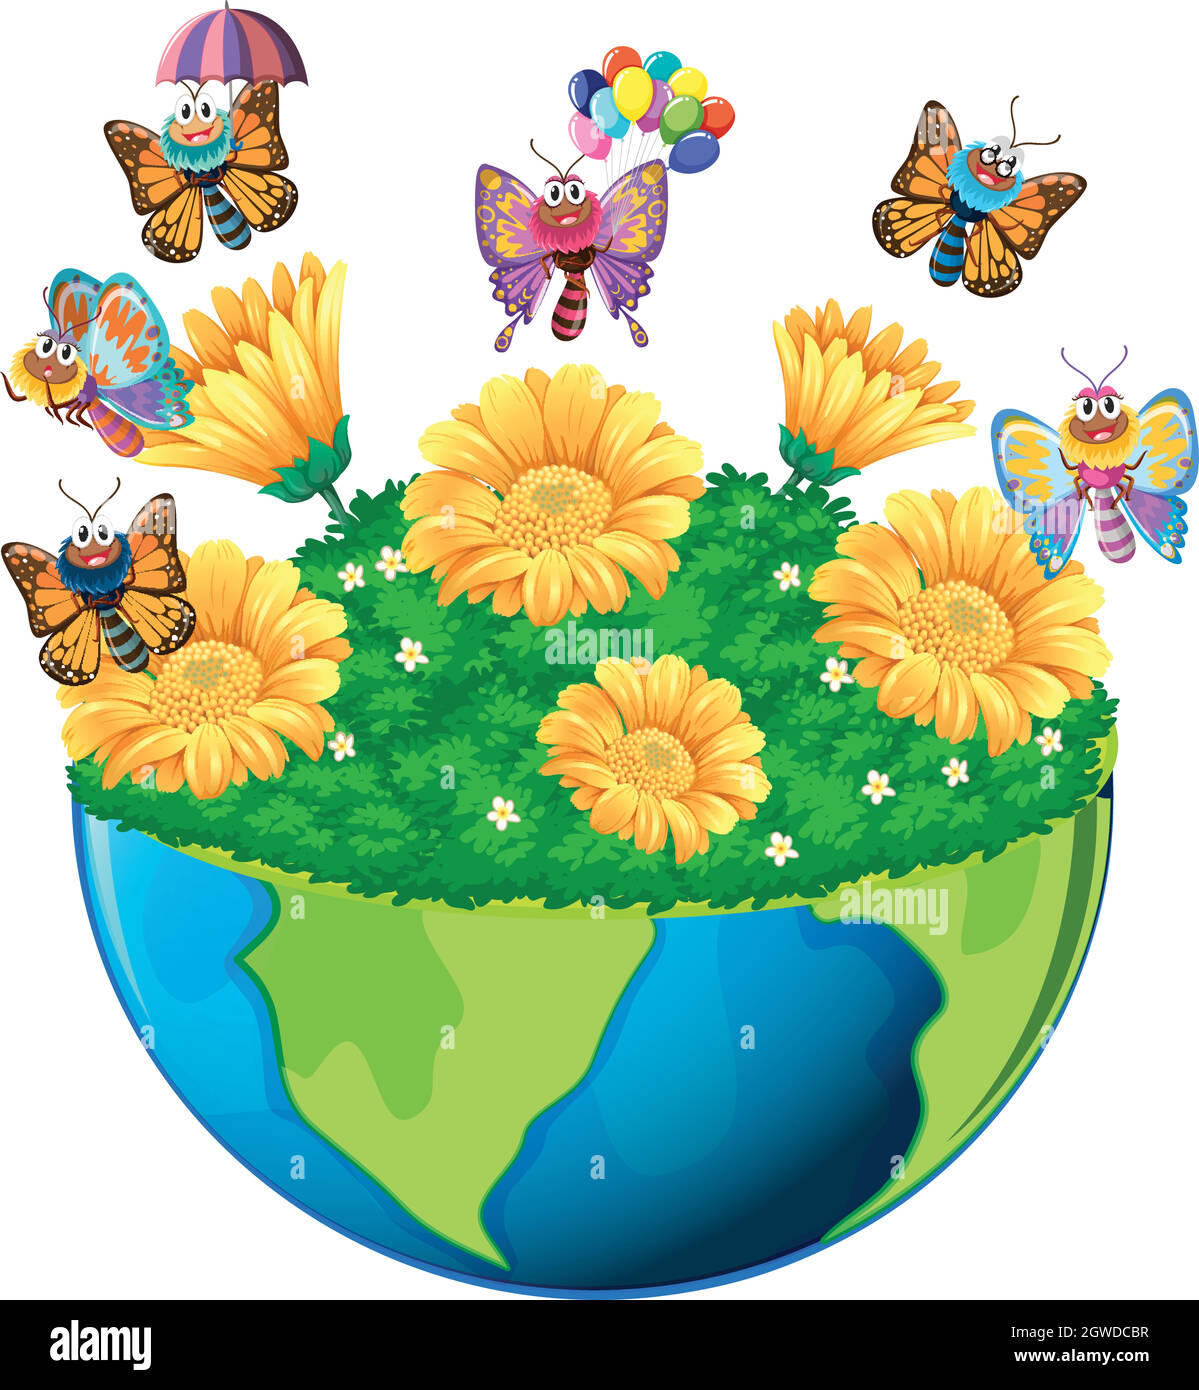 https://c8.alamy.com/comp/2GWDCBR/earth-theme-with-butterflies-and-flowers-2GWDCBR.jpg